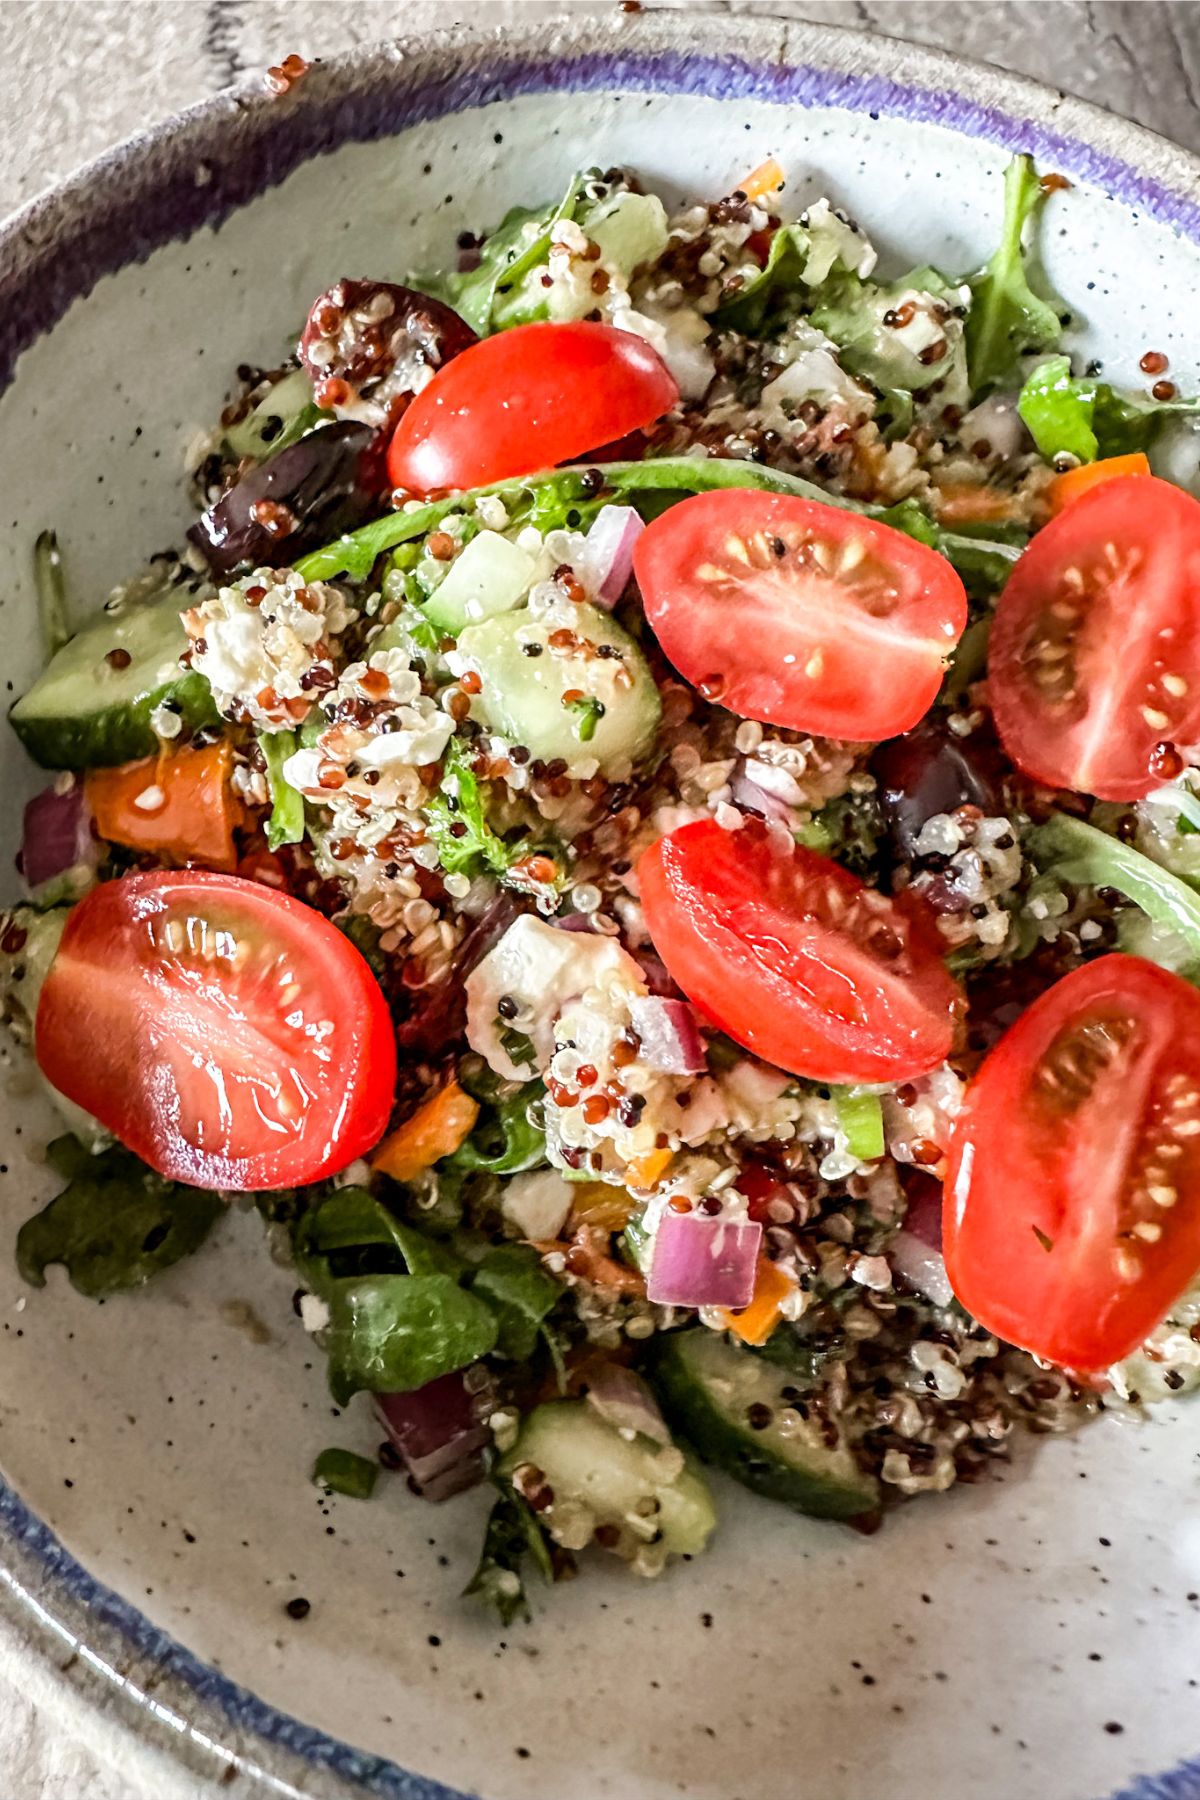 arugula and quinoa salad with yummy red tomatoes.